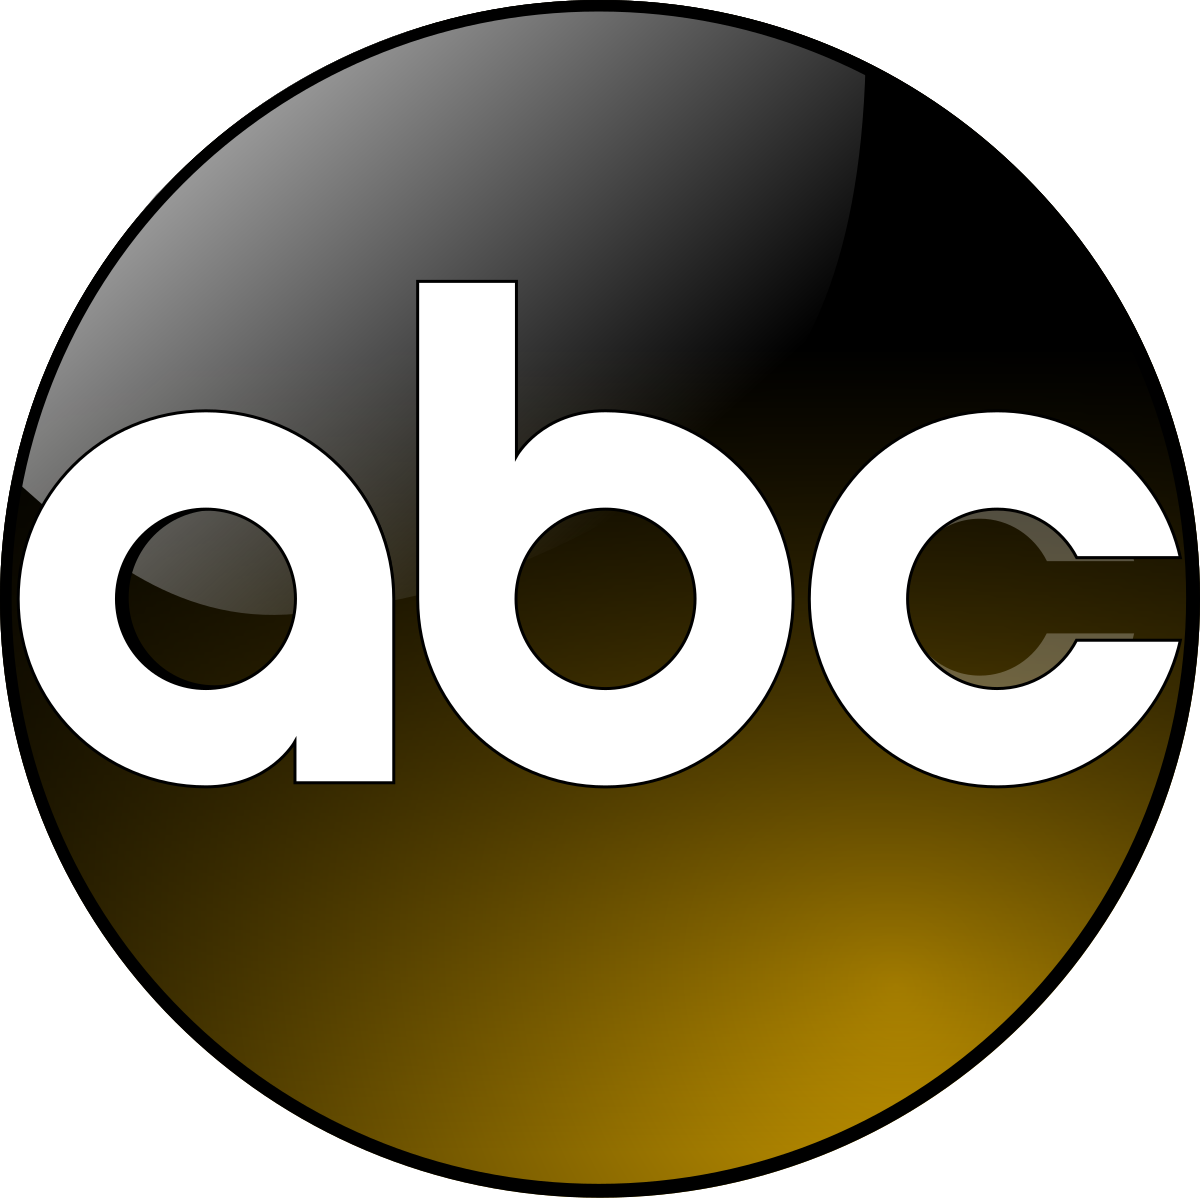 New_abc_gold.svg[1].png